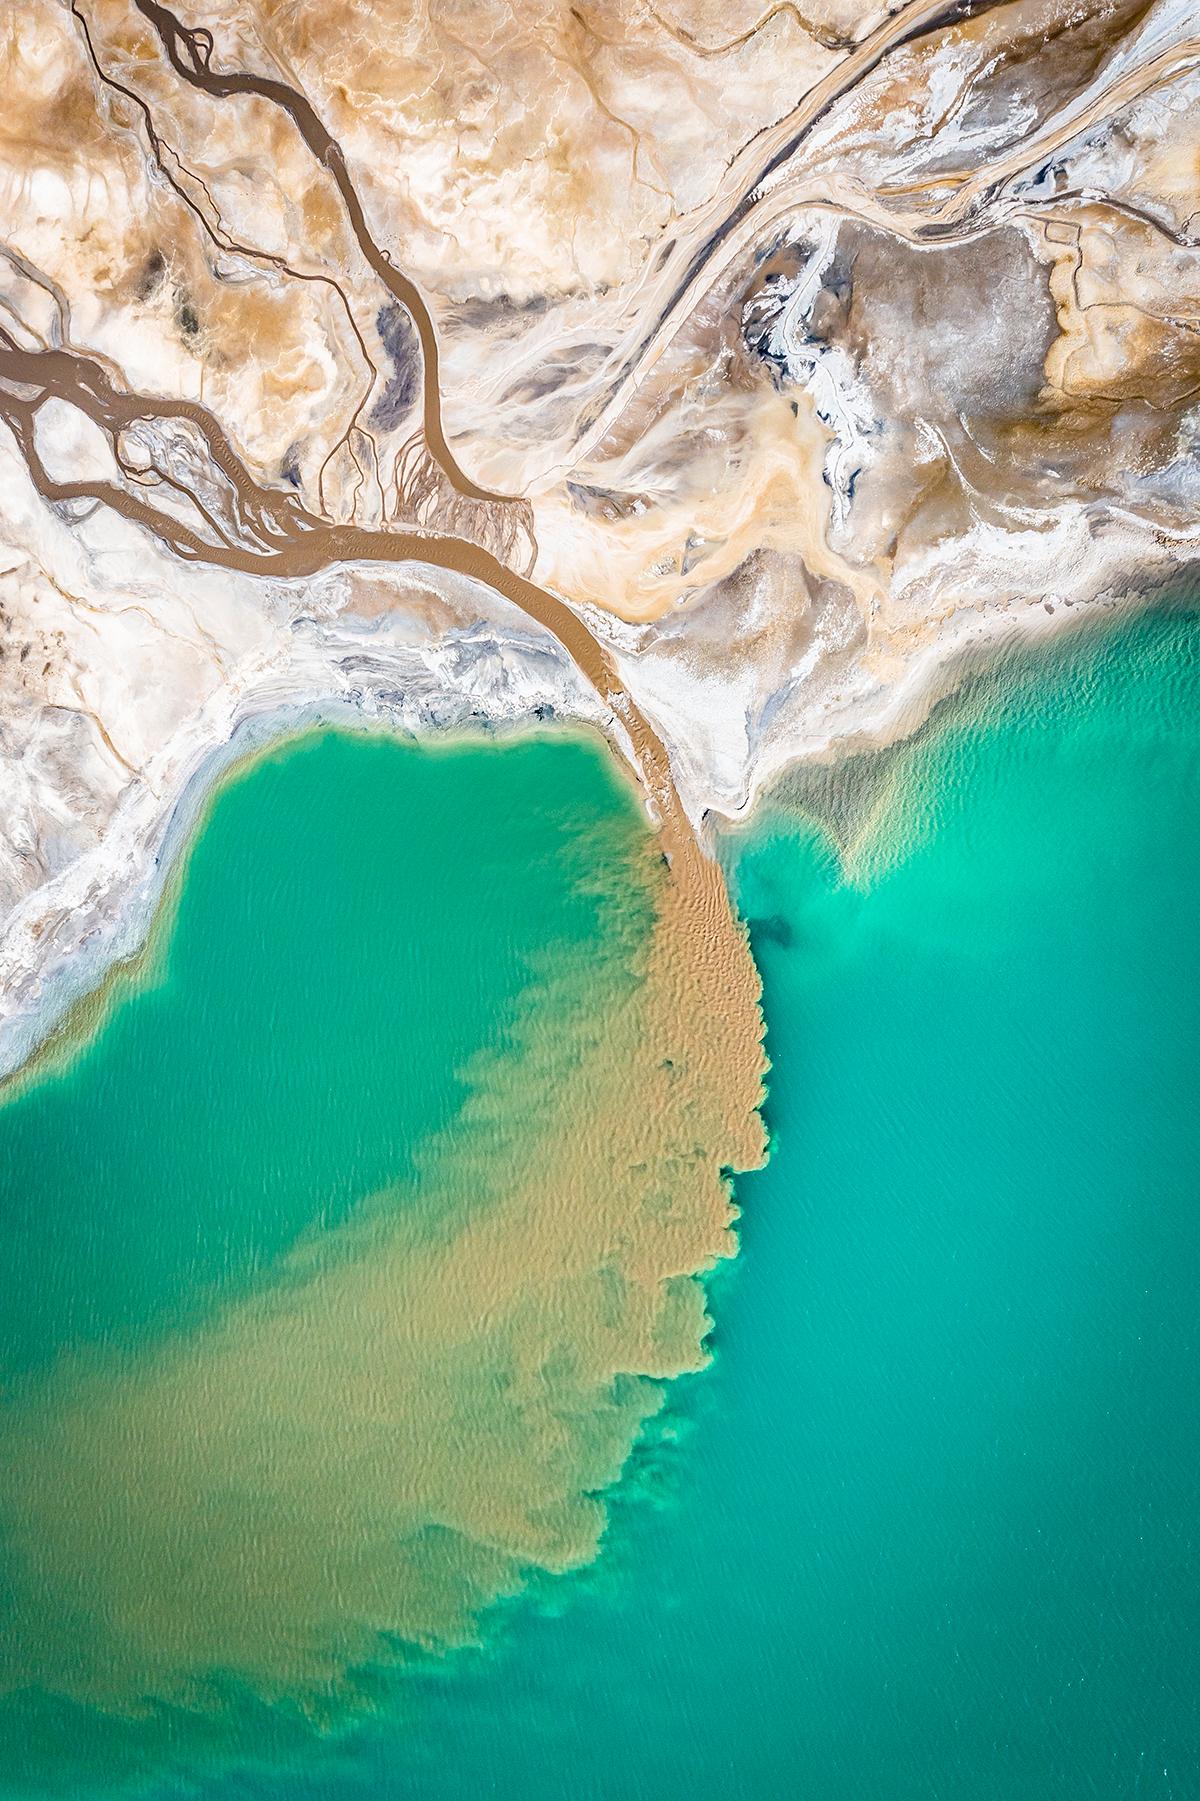 "Turquoise Lake" by Marcin Giba, Poland; "I took this photo of a turquoise lake in Poland with a drone in autumn 2021. Let us not be deceived by the blue color of the water, or the color of the sand. It is the result of human activity interfering with the natural environment. You cannot bathe in this lake, and the water is poisonous." (© Marcin Giba, Poland, Winner, National Awards, Landscape, 2022 Sony World Photography Awards)